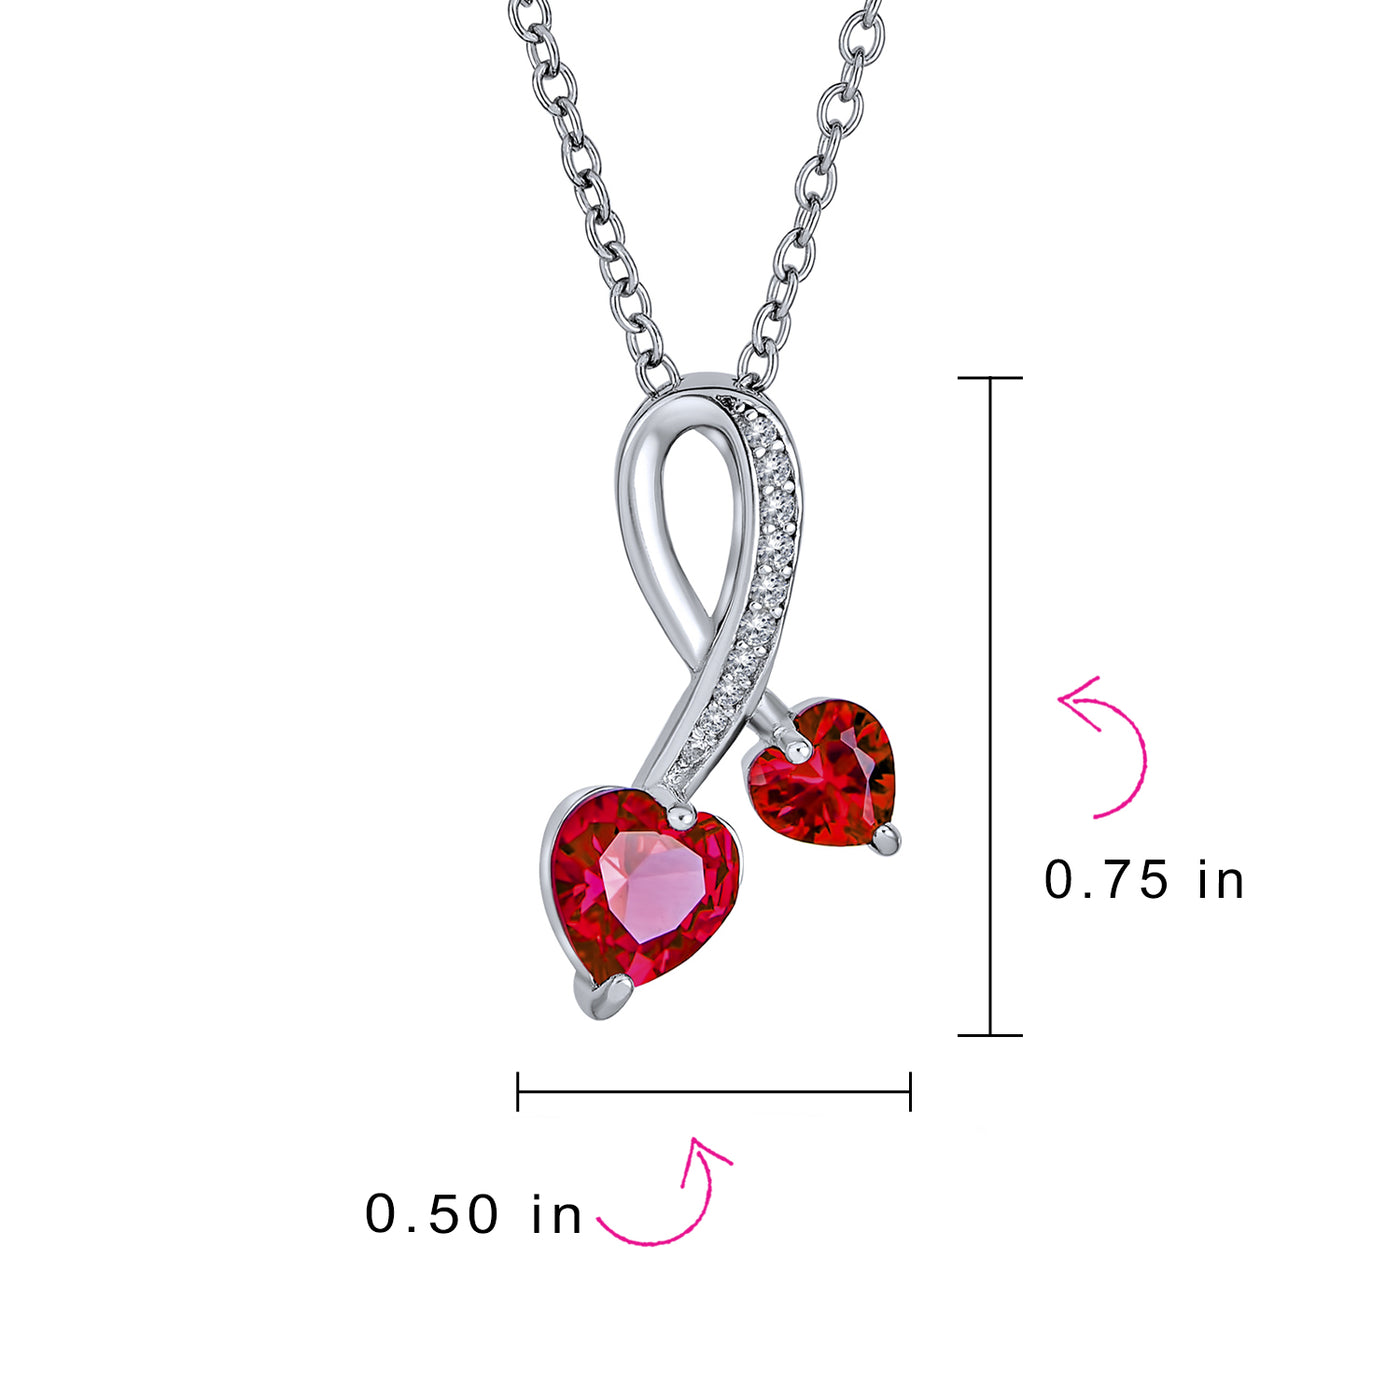 Double Hearts Necklace